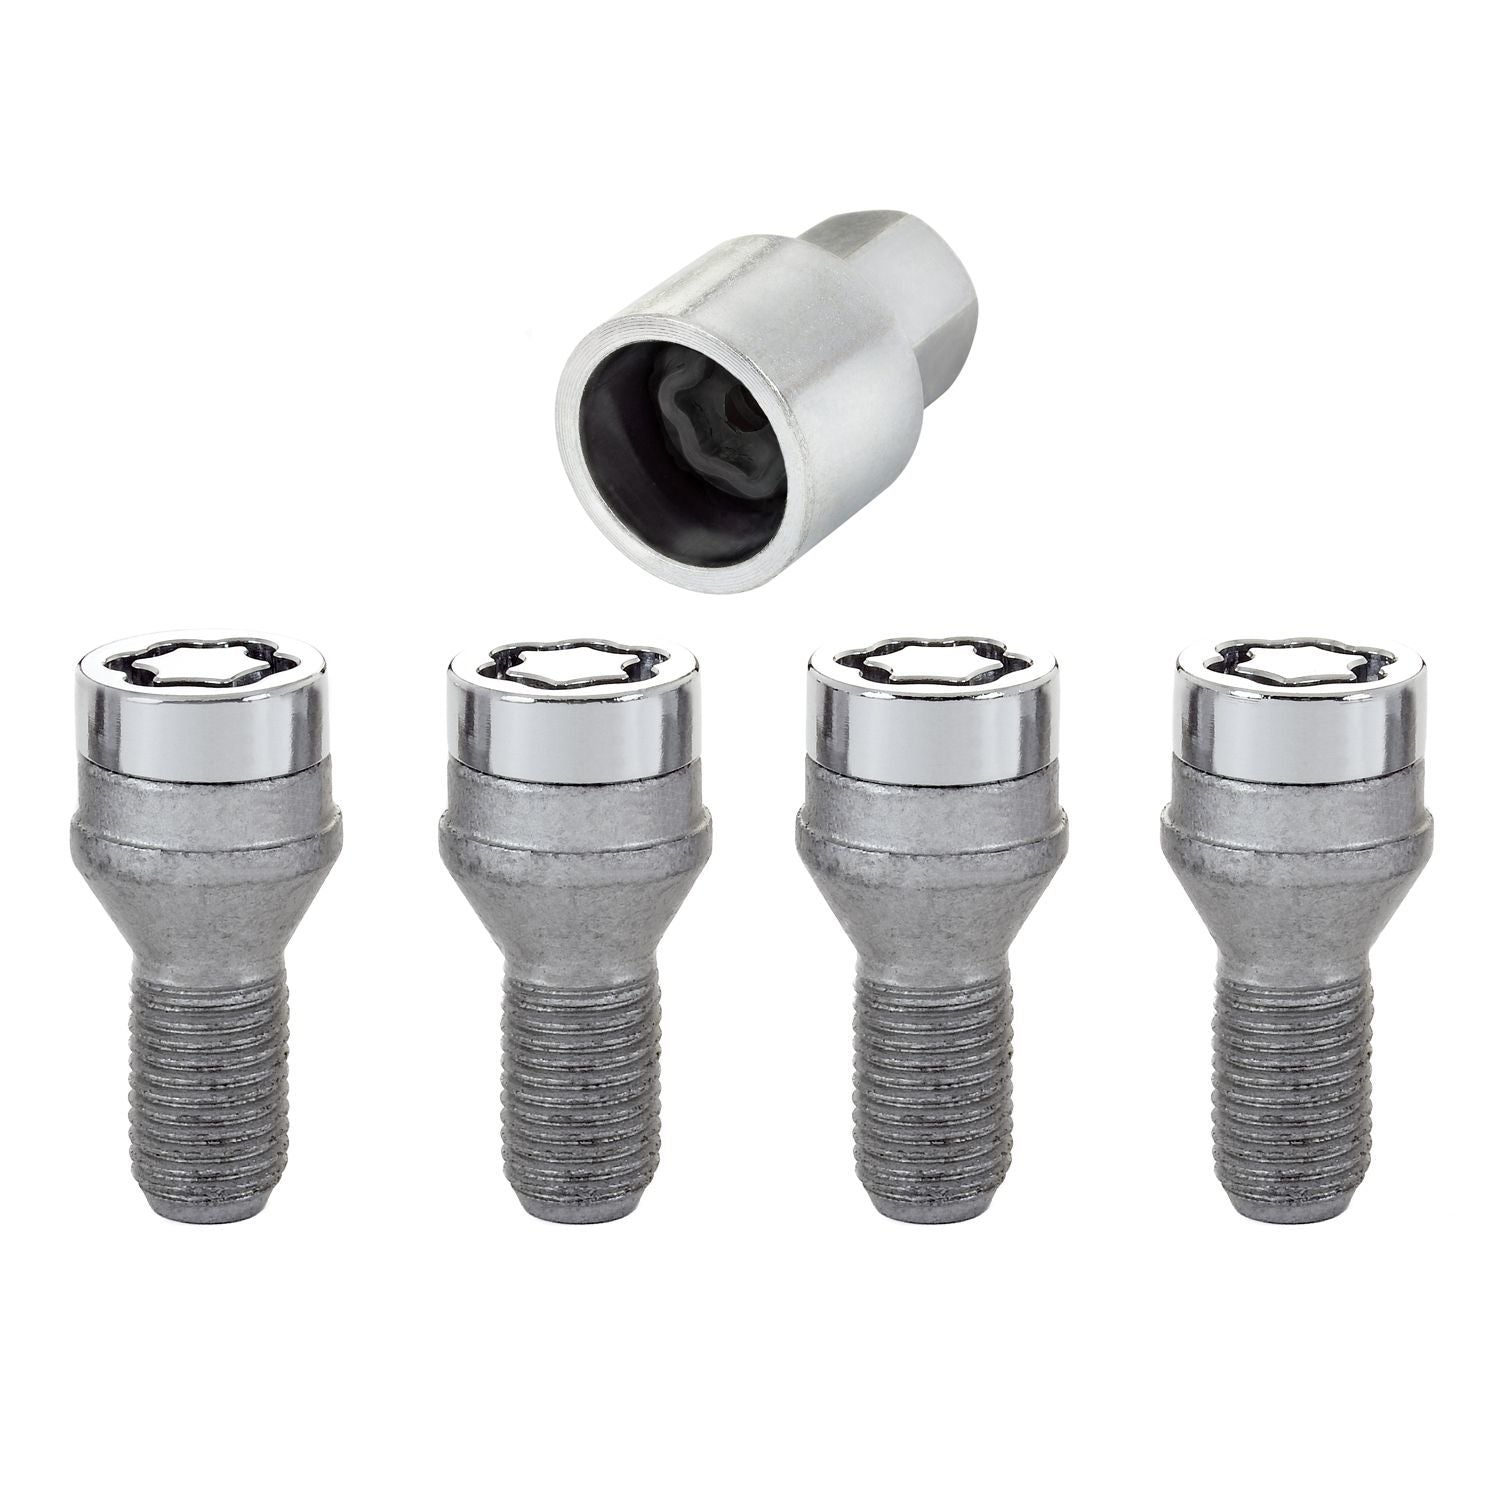 McGard 27216 - (4) Lock Bolts Conical 12X1.25 Hex 17mm